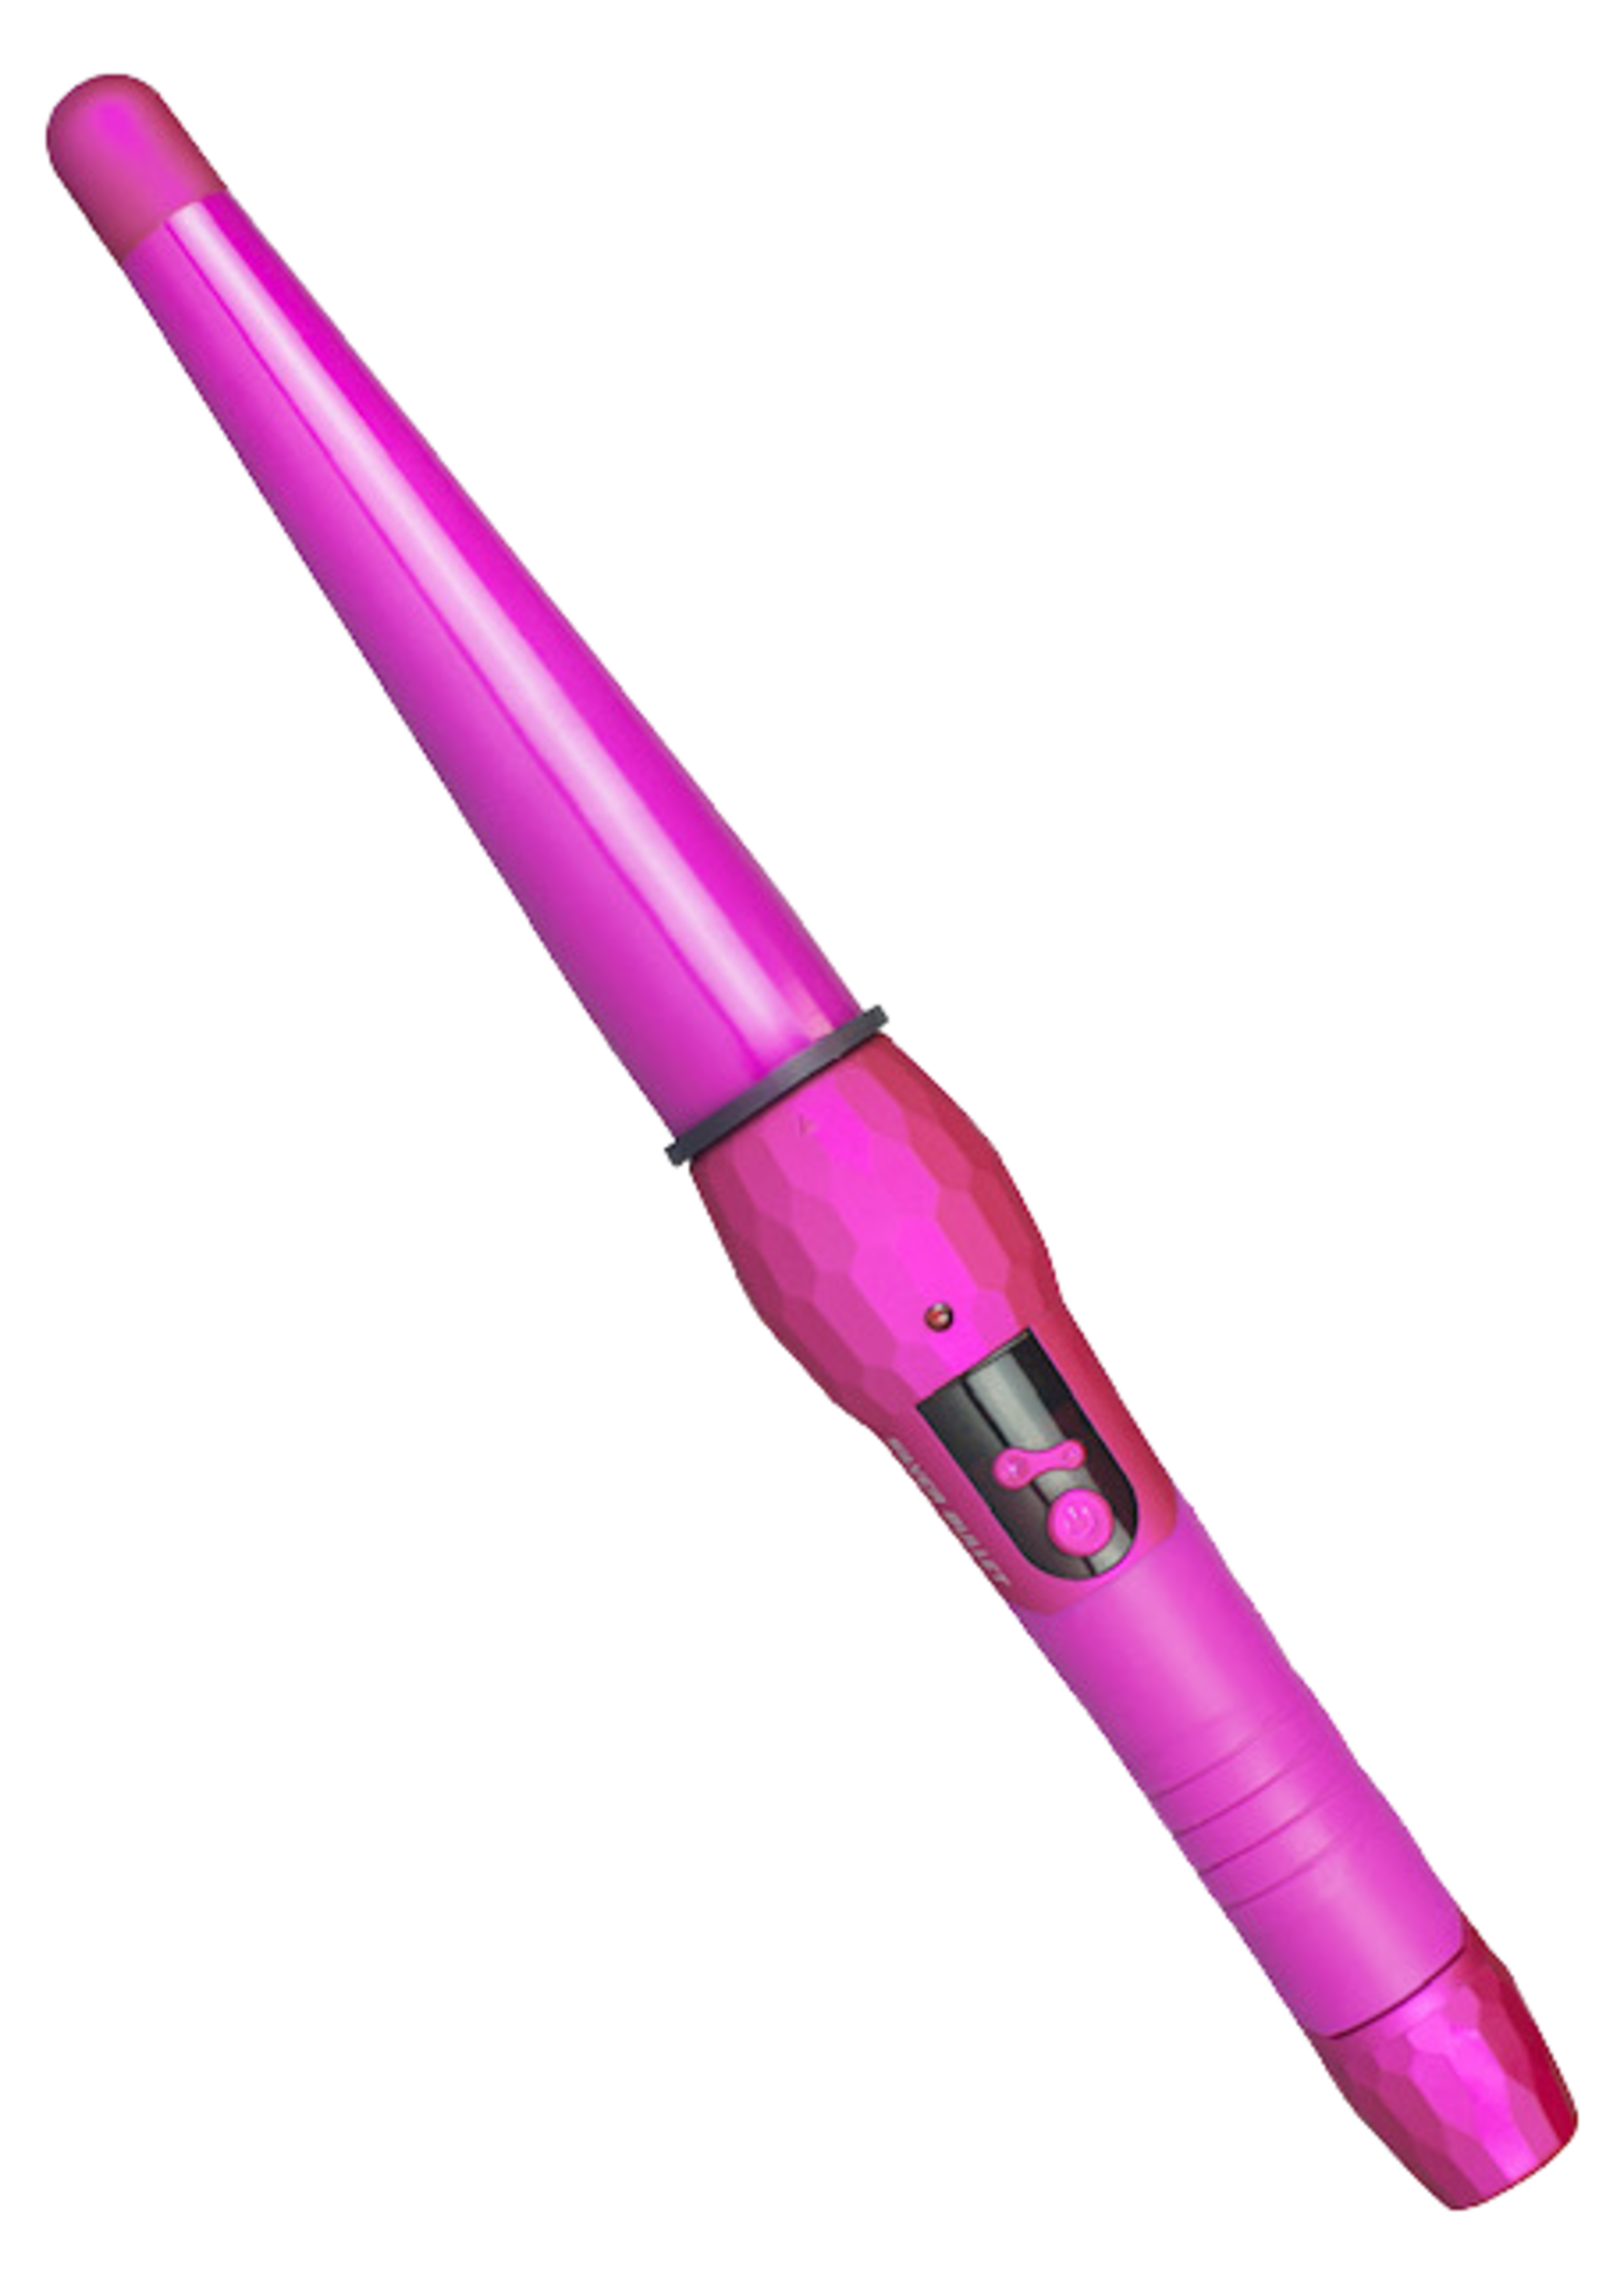 Silver Bullet Silver Bullet Fastlane Ceramic Conical Wand Pink - 19mm - 32mm Large